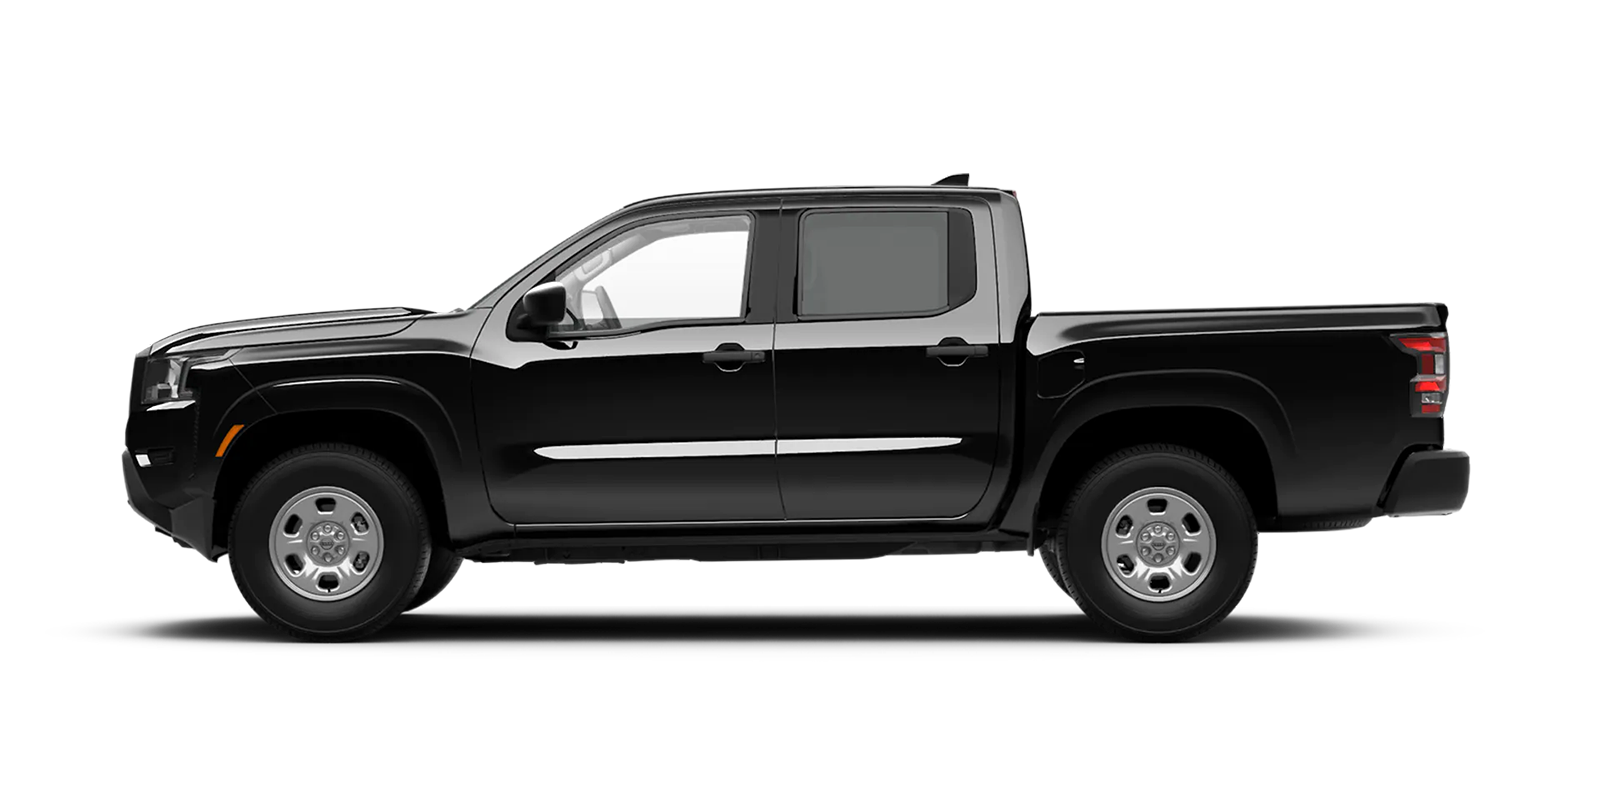 2022 Frontier Crew Cab S 4x4 in Super Black | Nissan of Pittsfield in Pittsfield MA